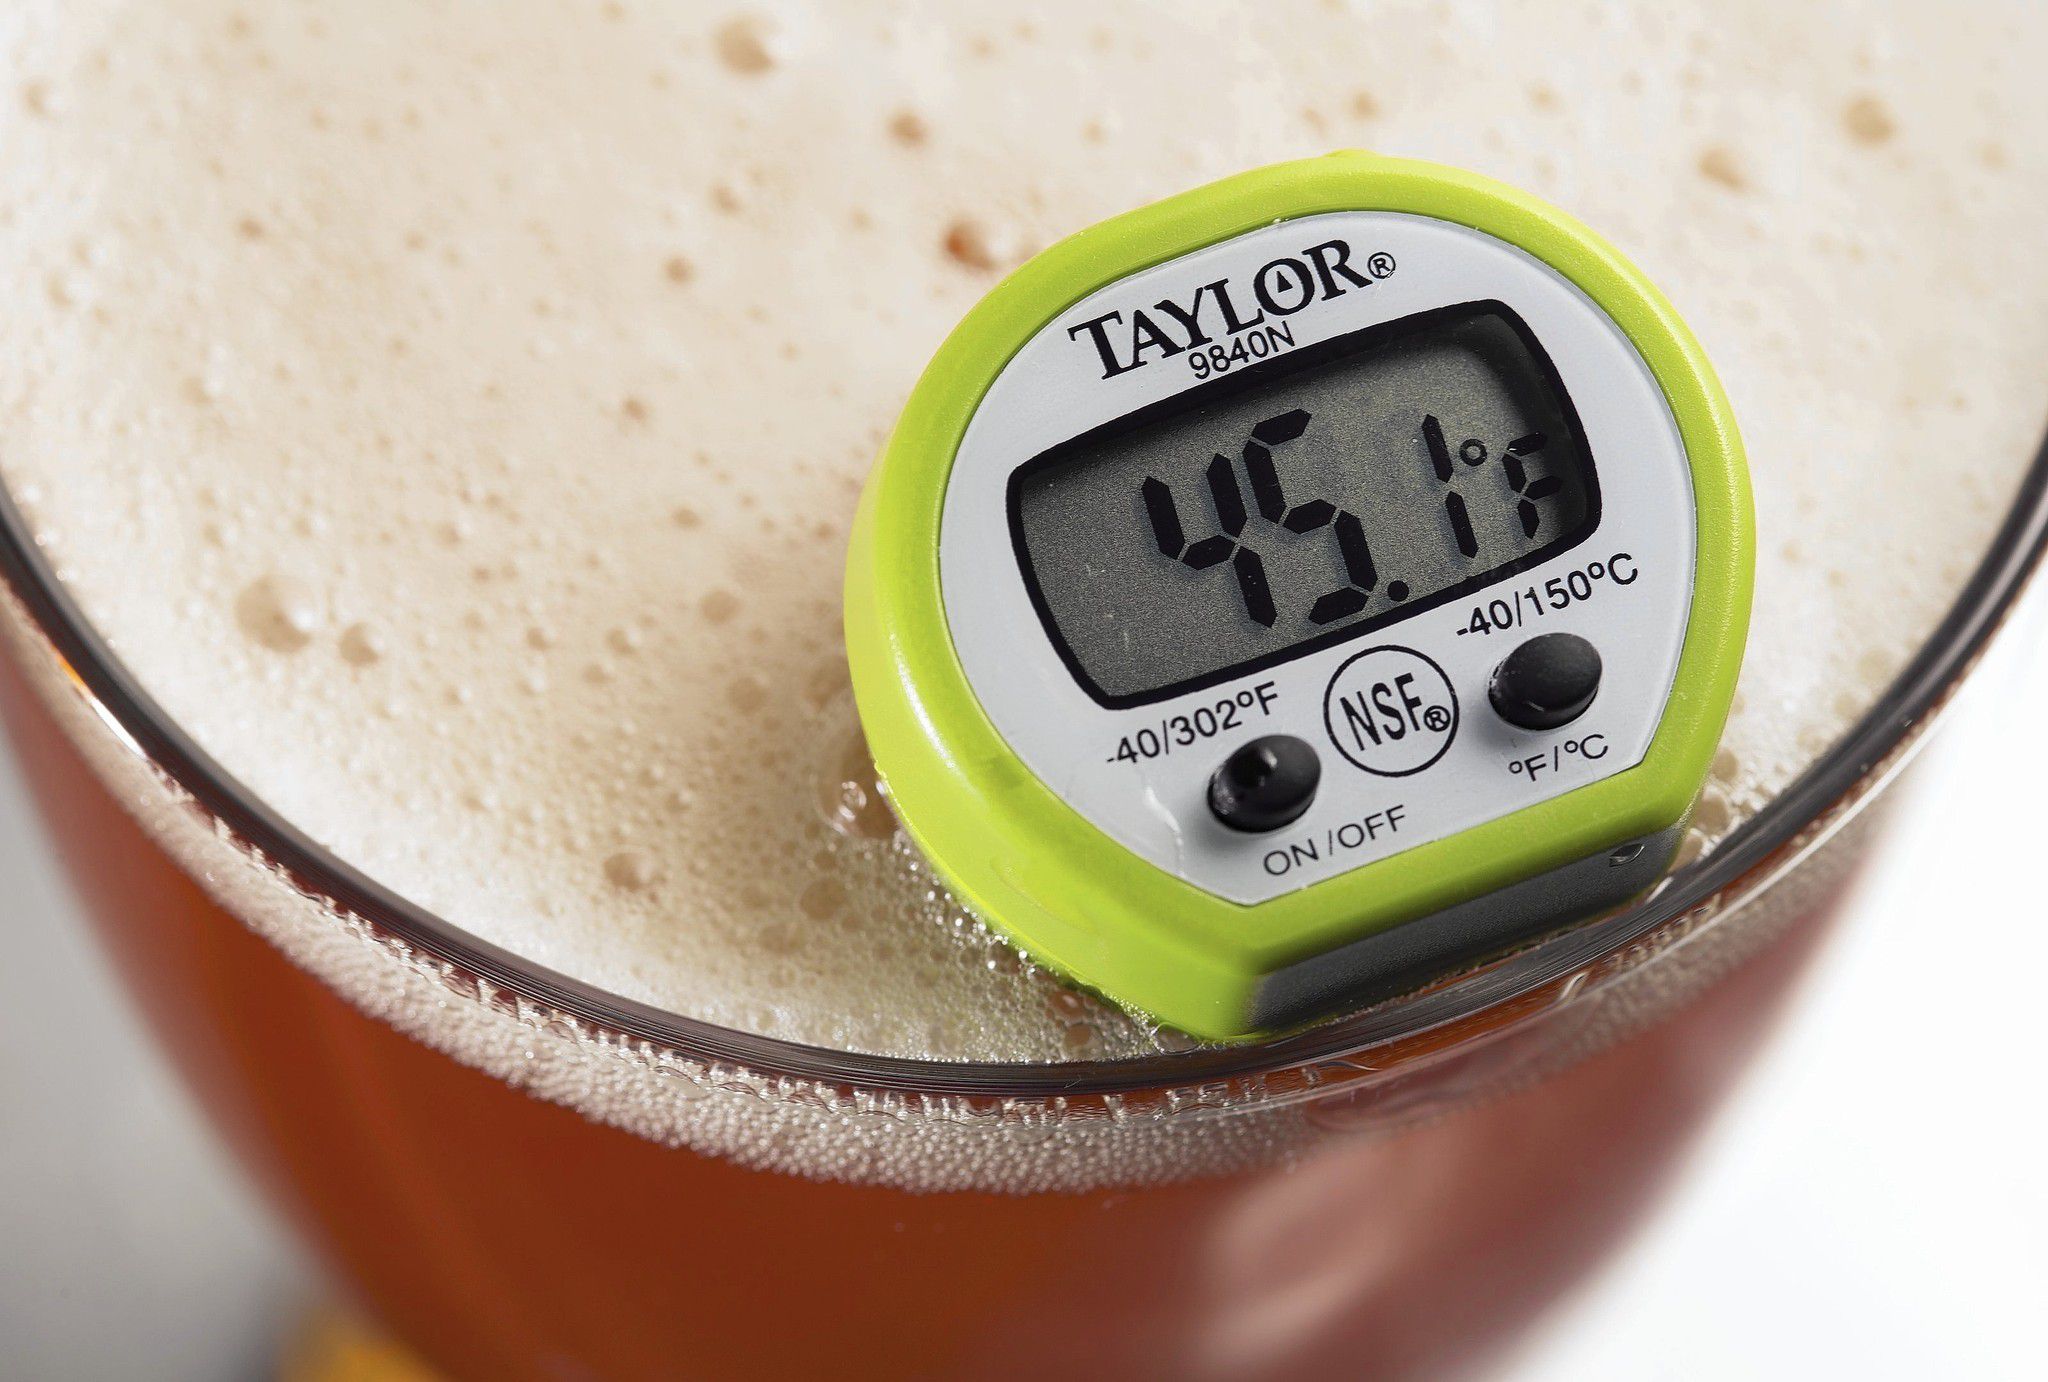 What's the Ideal Temperature for Beer?